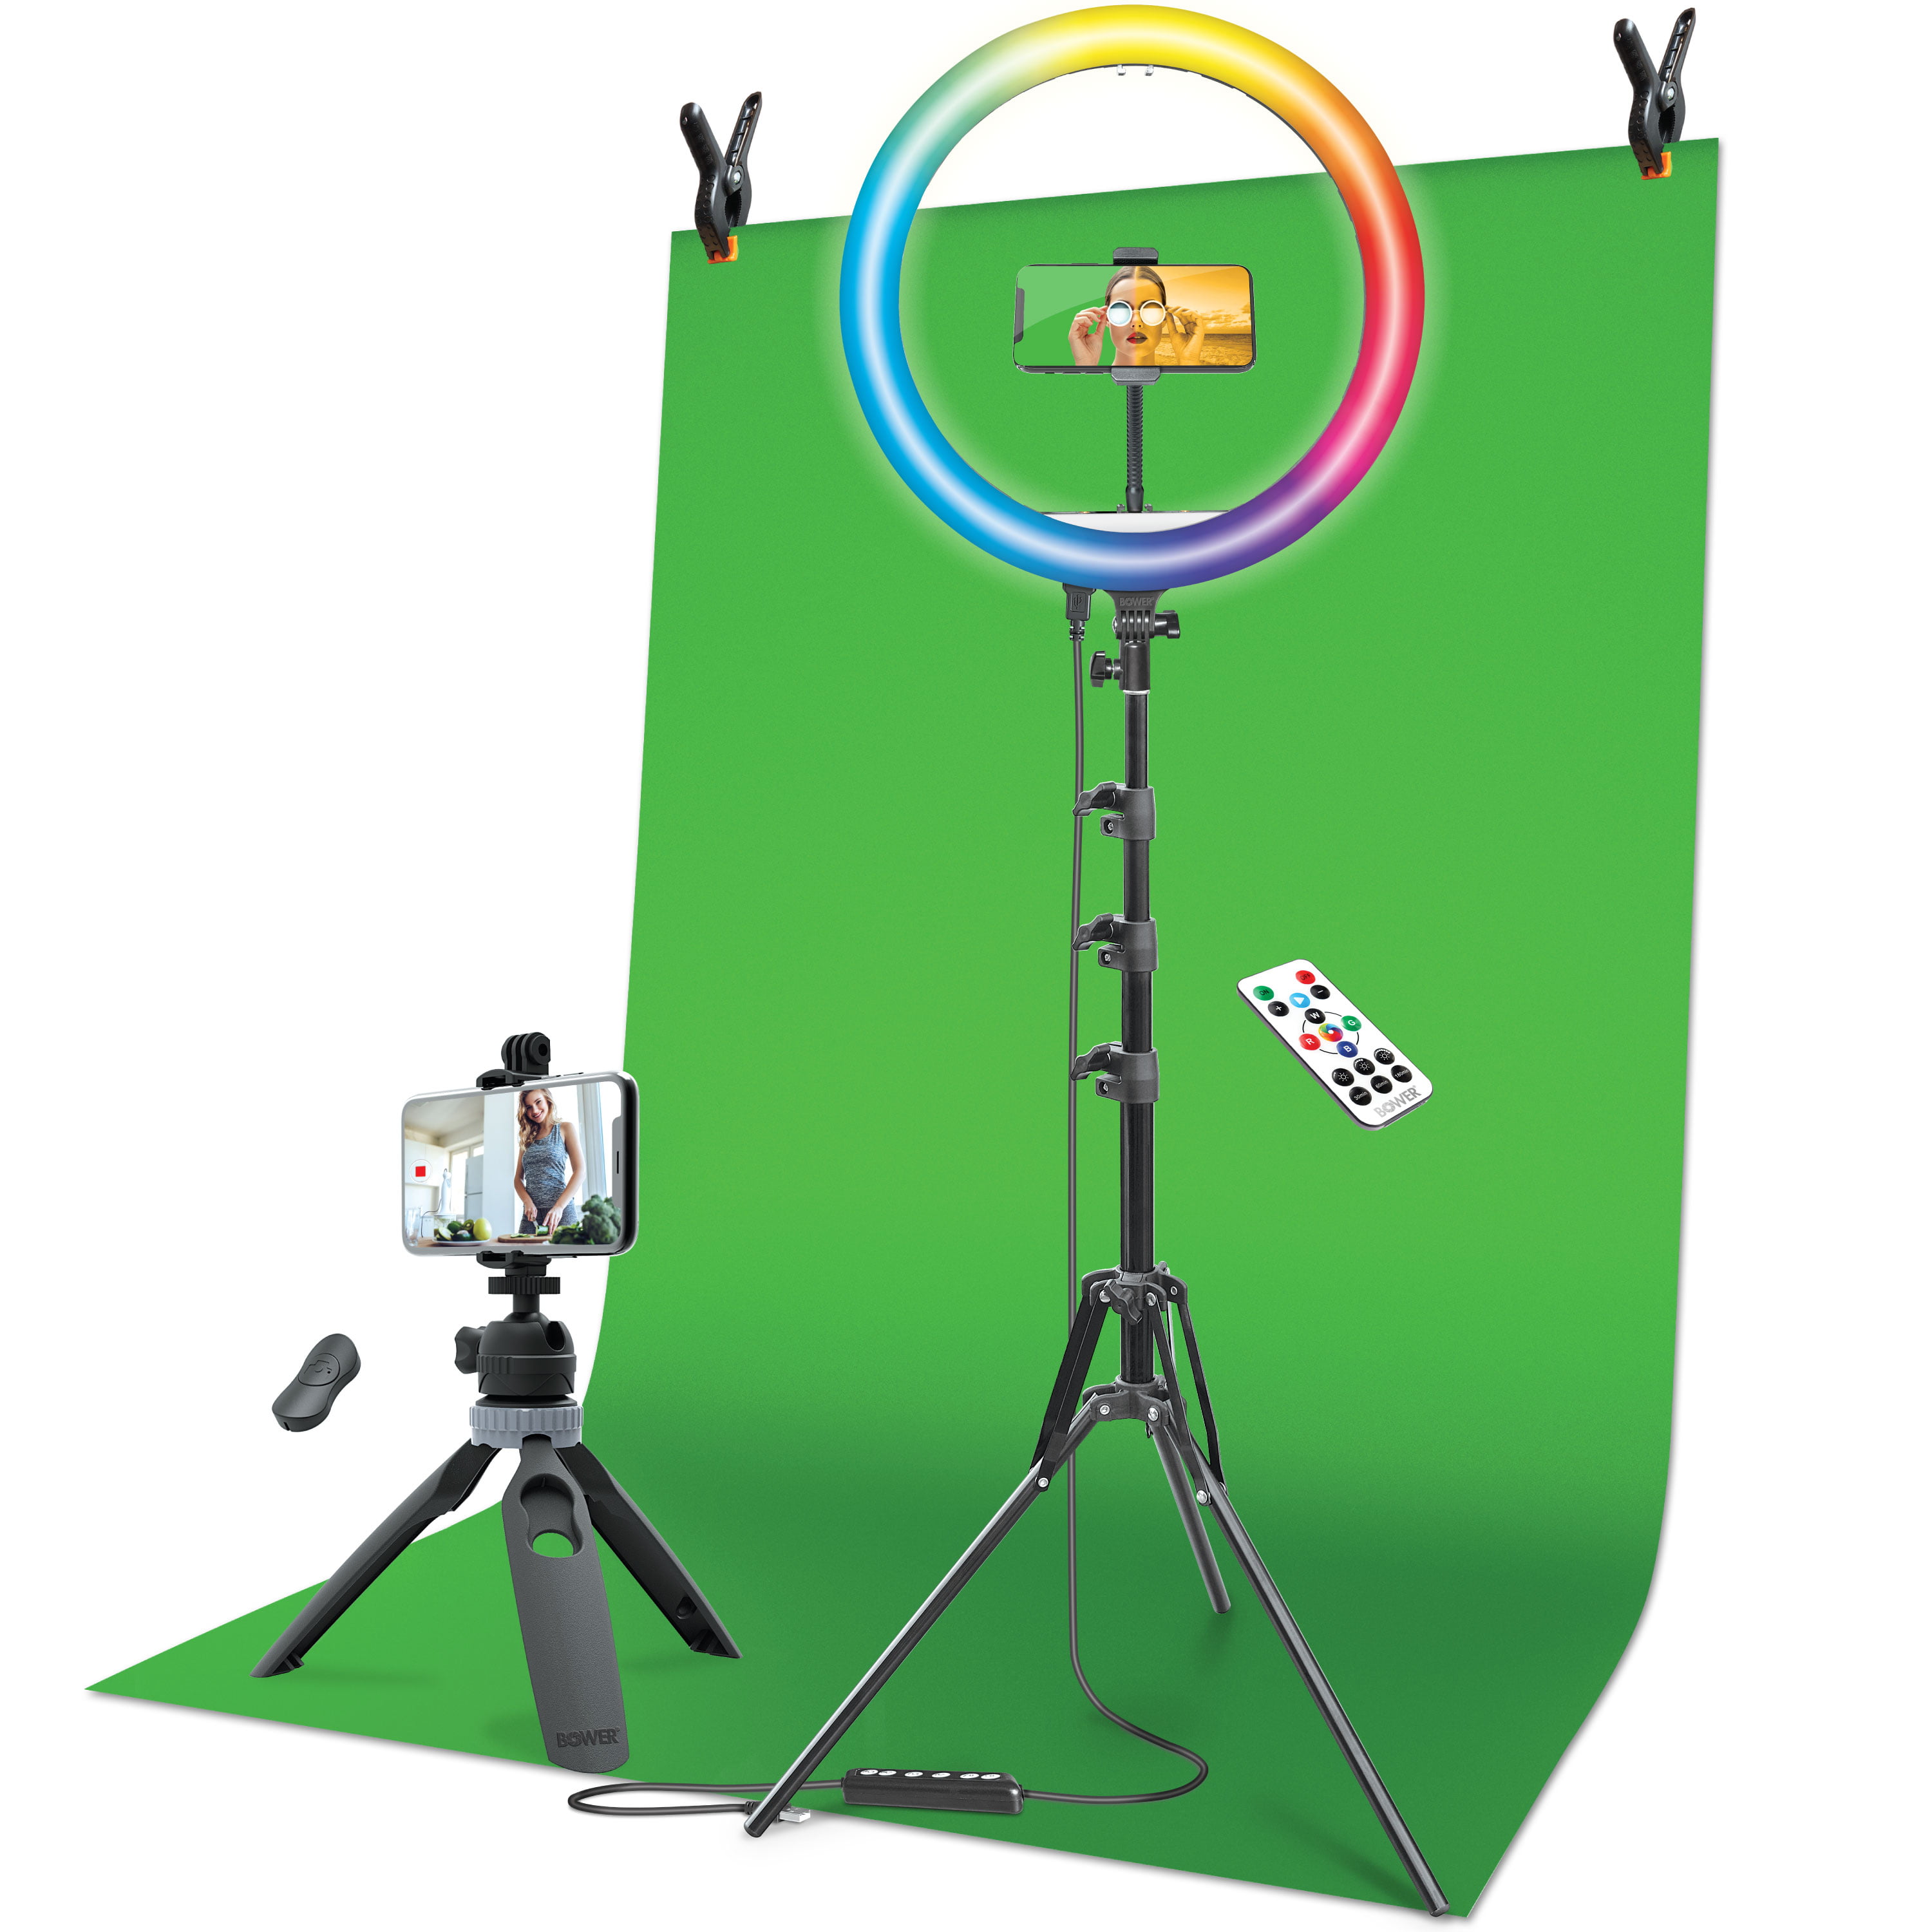 What Accessories Do You Need For A Green Screen Video?